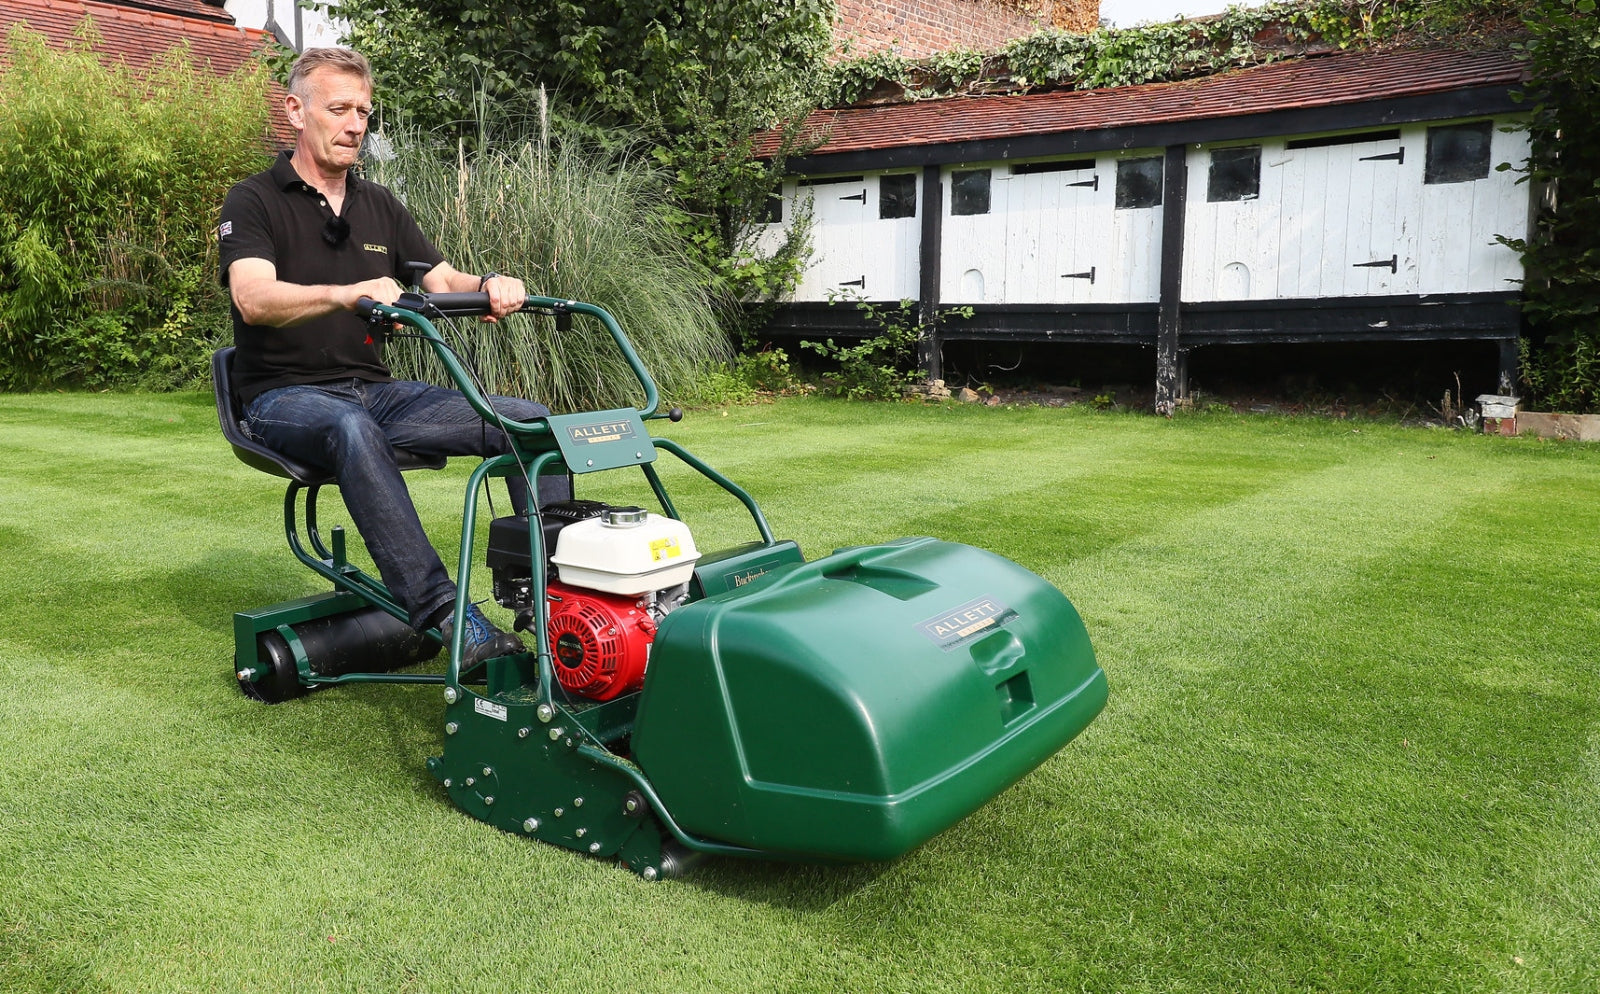 Load video: Video - Creating a beautiful lawn with The Allett Buckingham Range of Cylinder Lawn Mowers